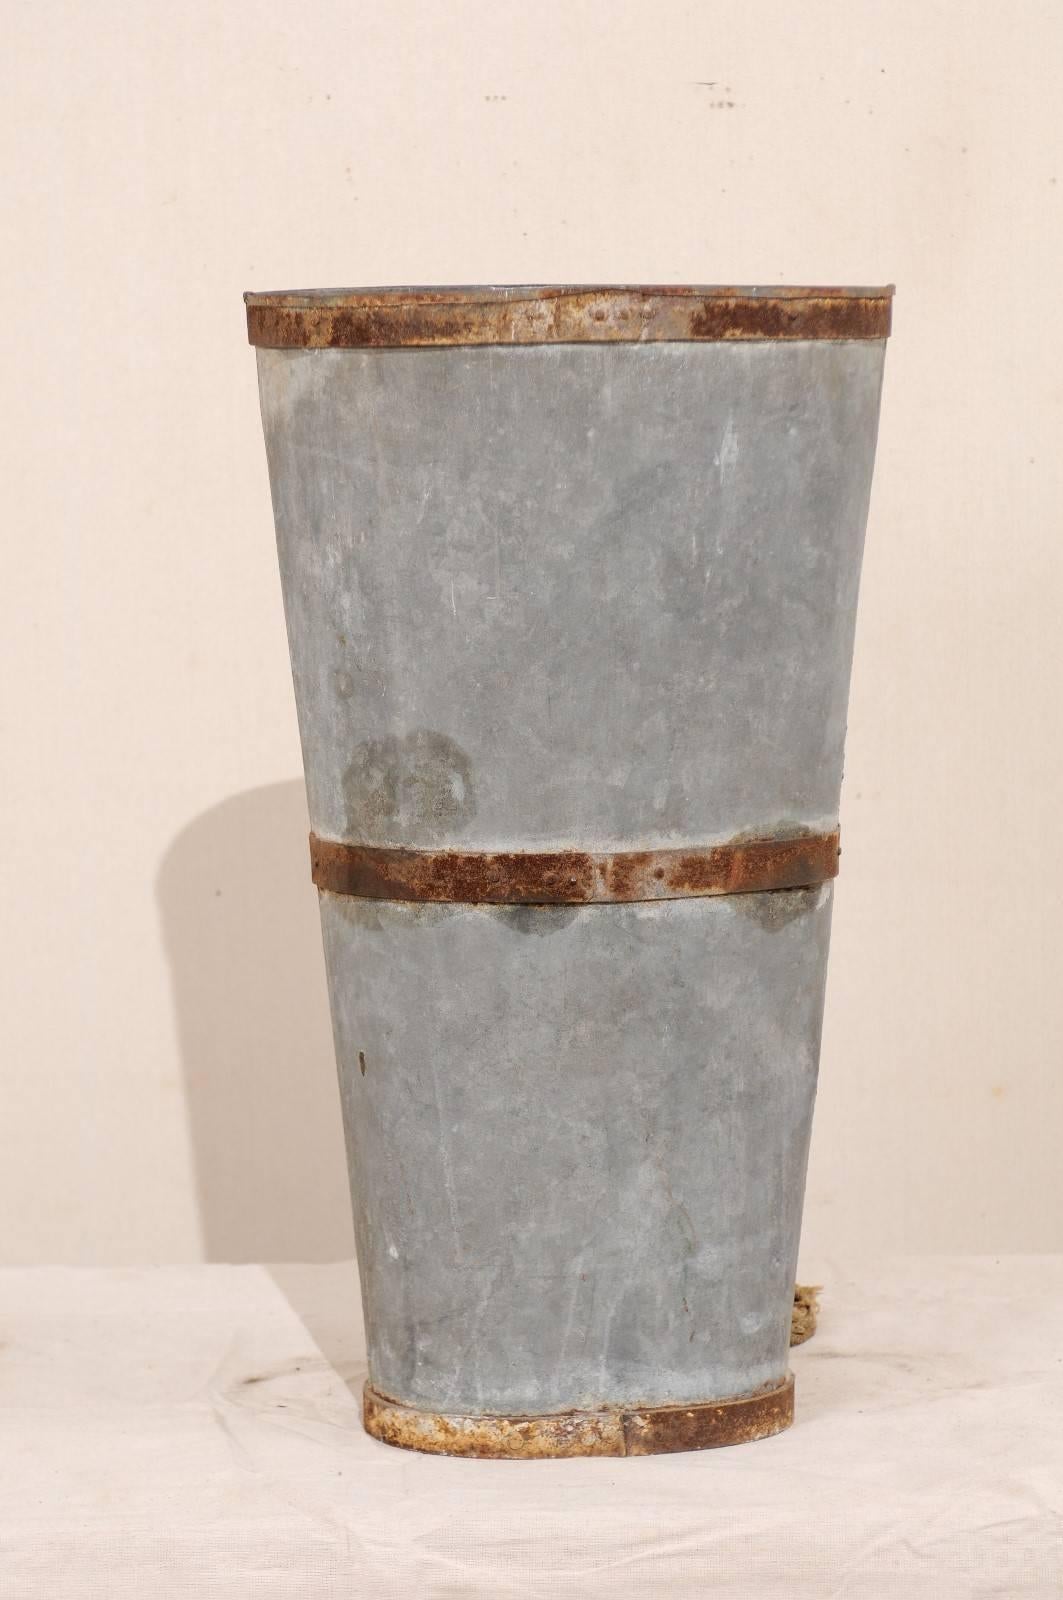 A mid-20th century, French grape harvest back hod. This French grape hod was once used in the countryside of France by pickers harvesting grapes. This hod is constructed of metal, which has a nicely aged patina. There are also some remnants of it's